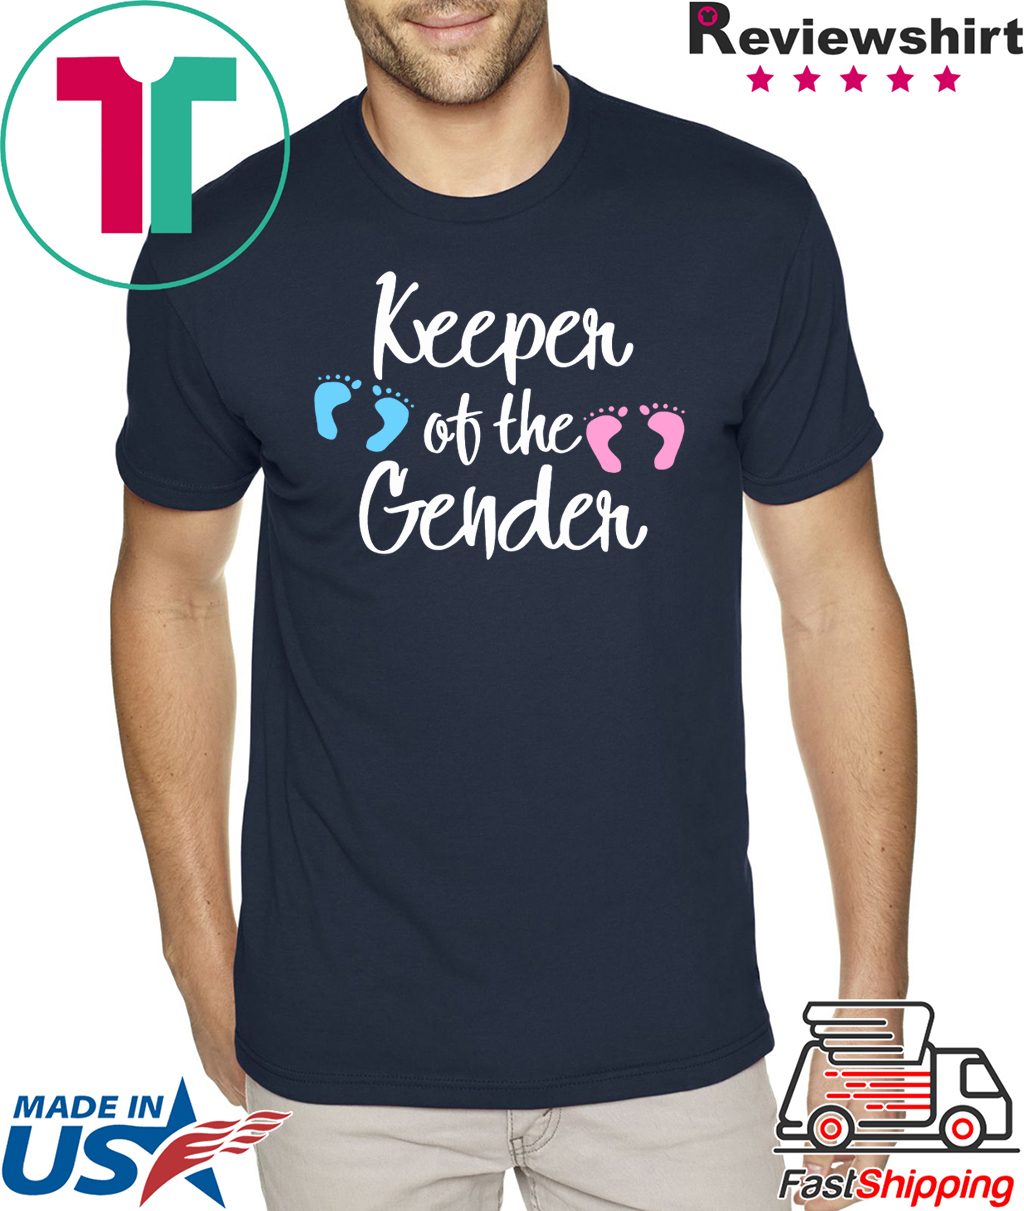 Keeper of Gender reveal party idea baby announcement 2020 t-shirts ...